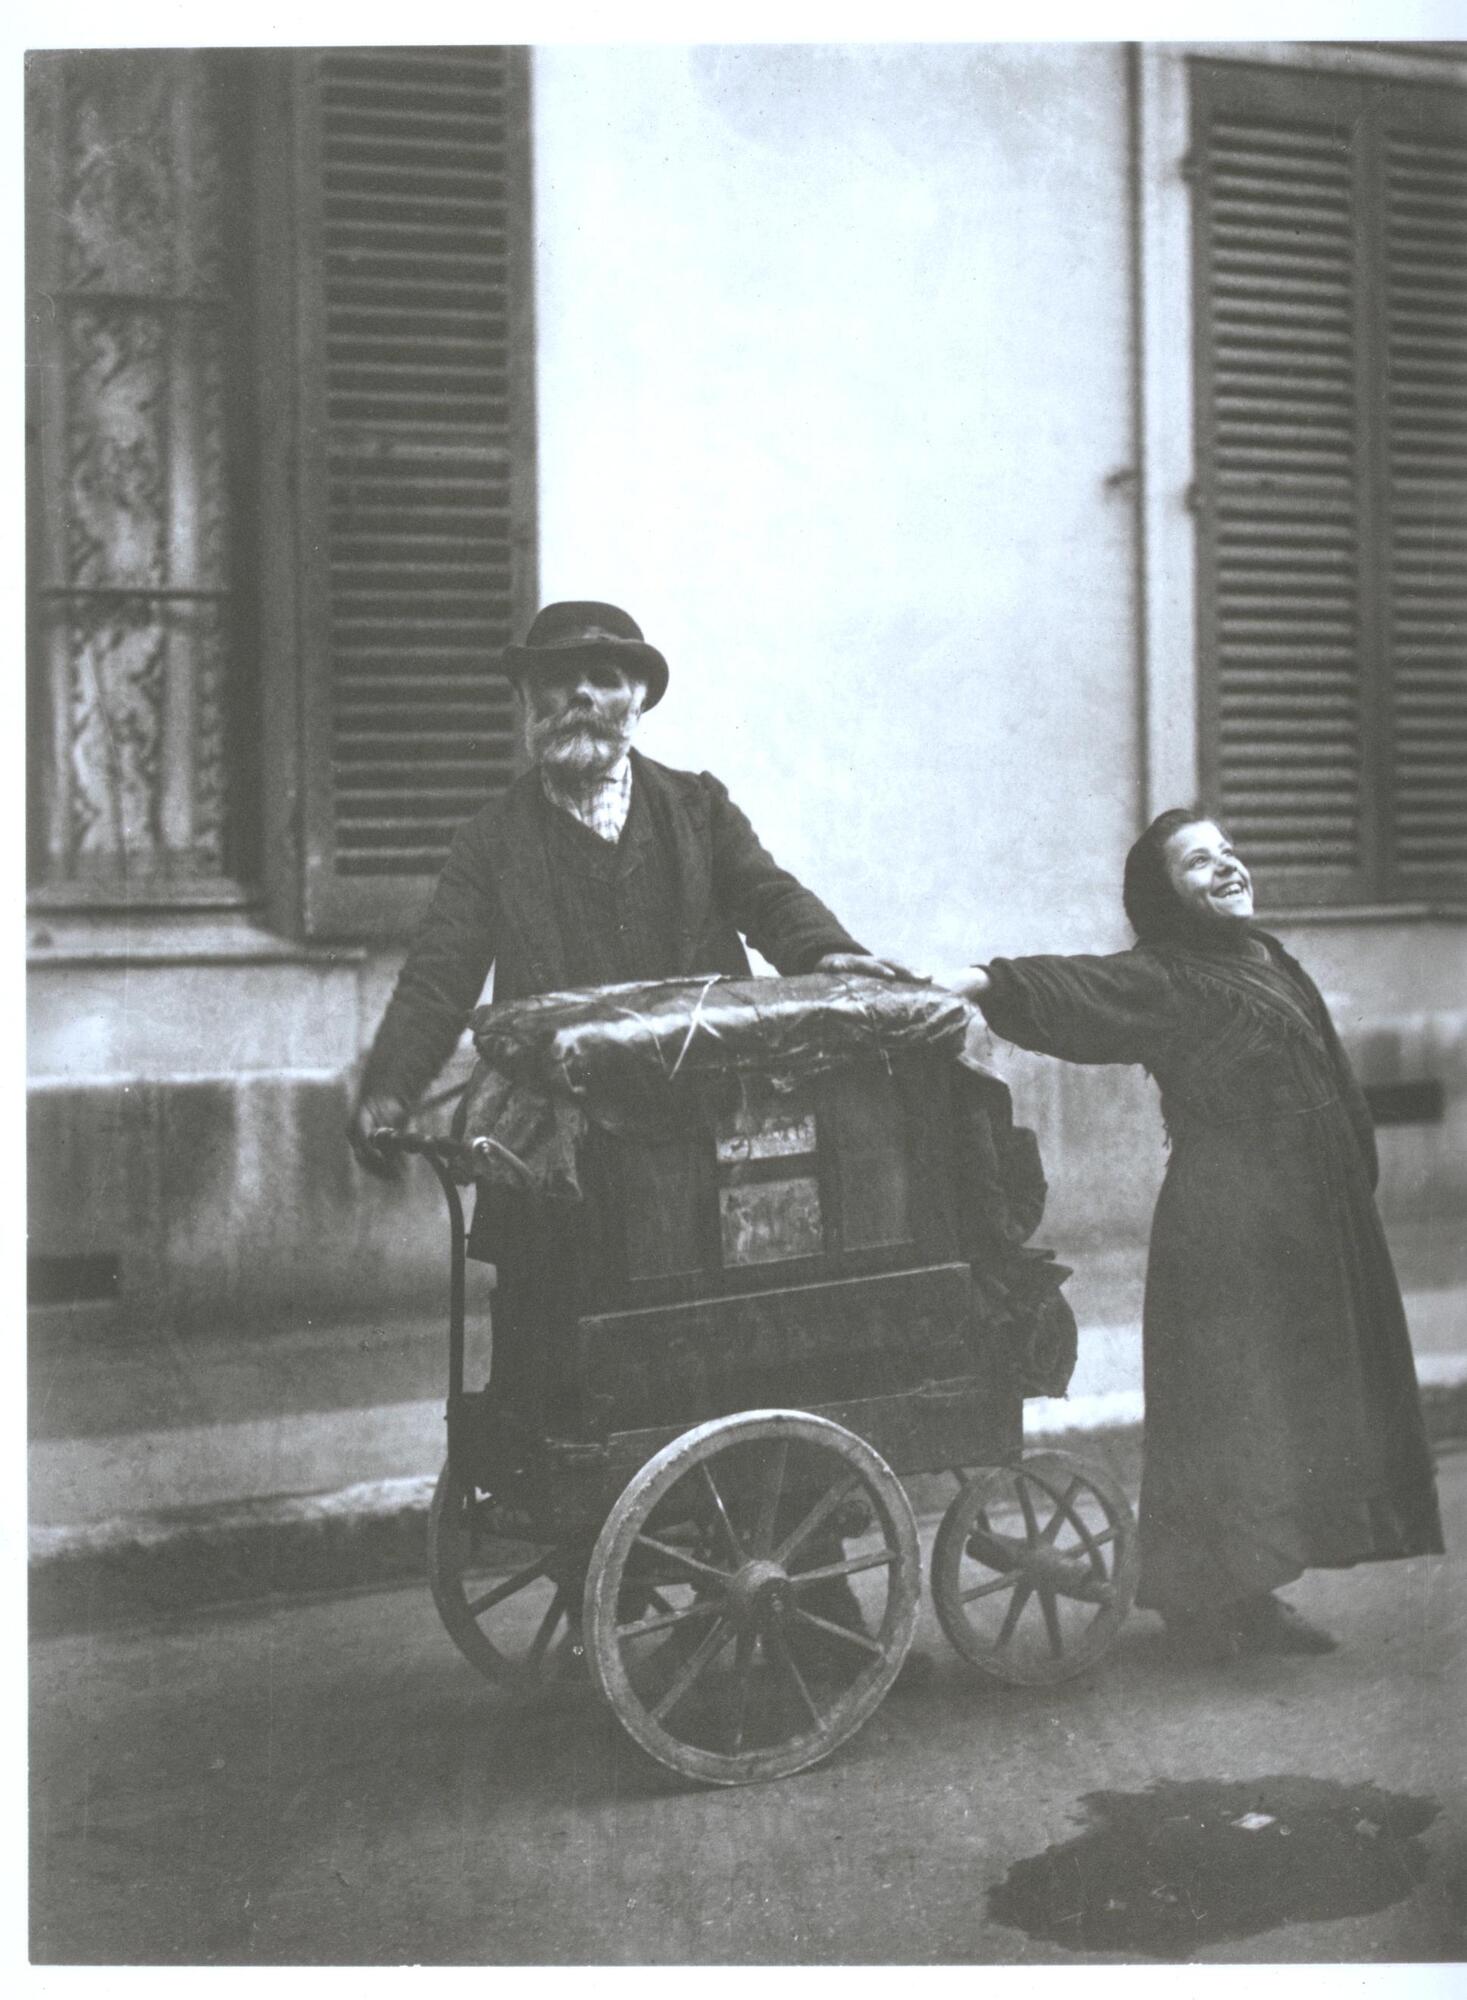 An organ grinder and a young girl perform on a Paris street.